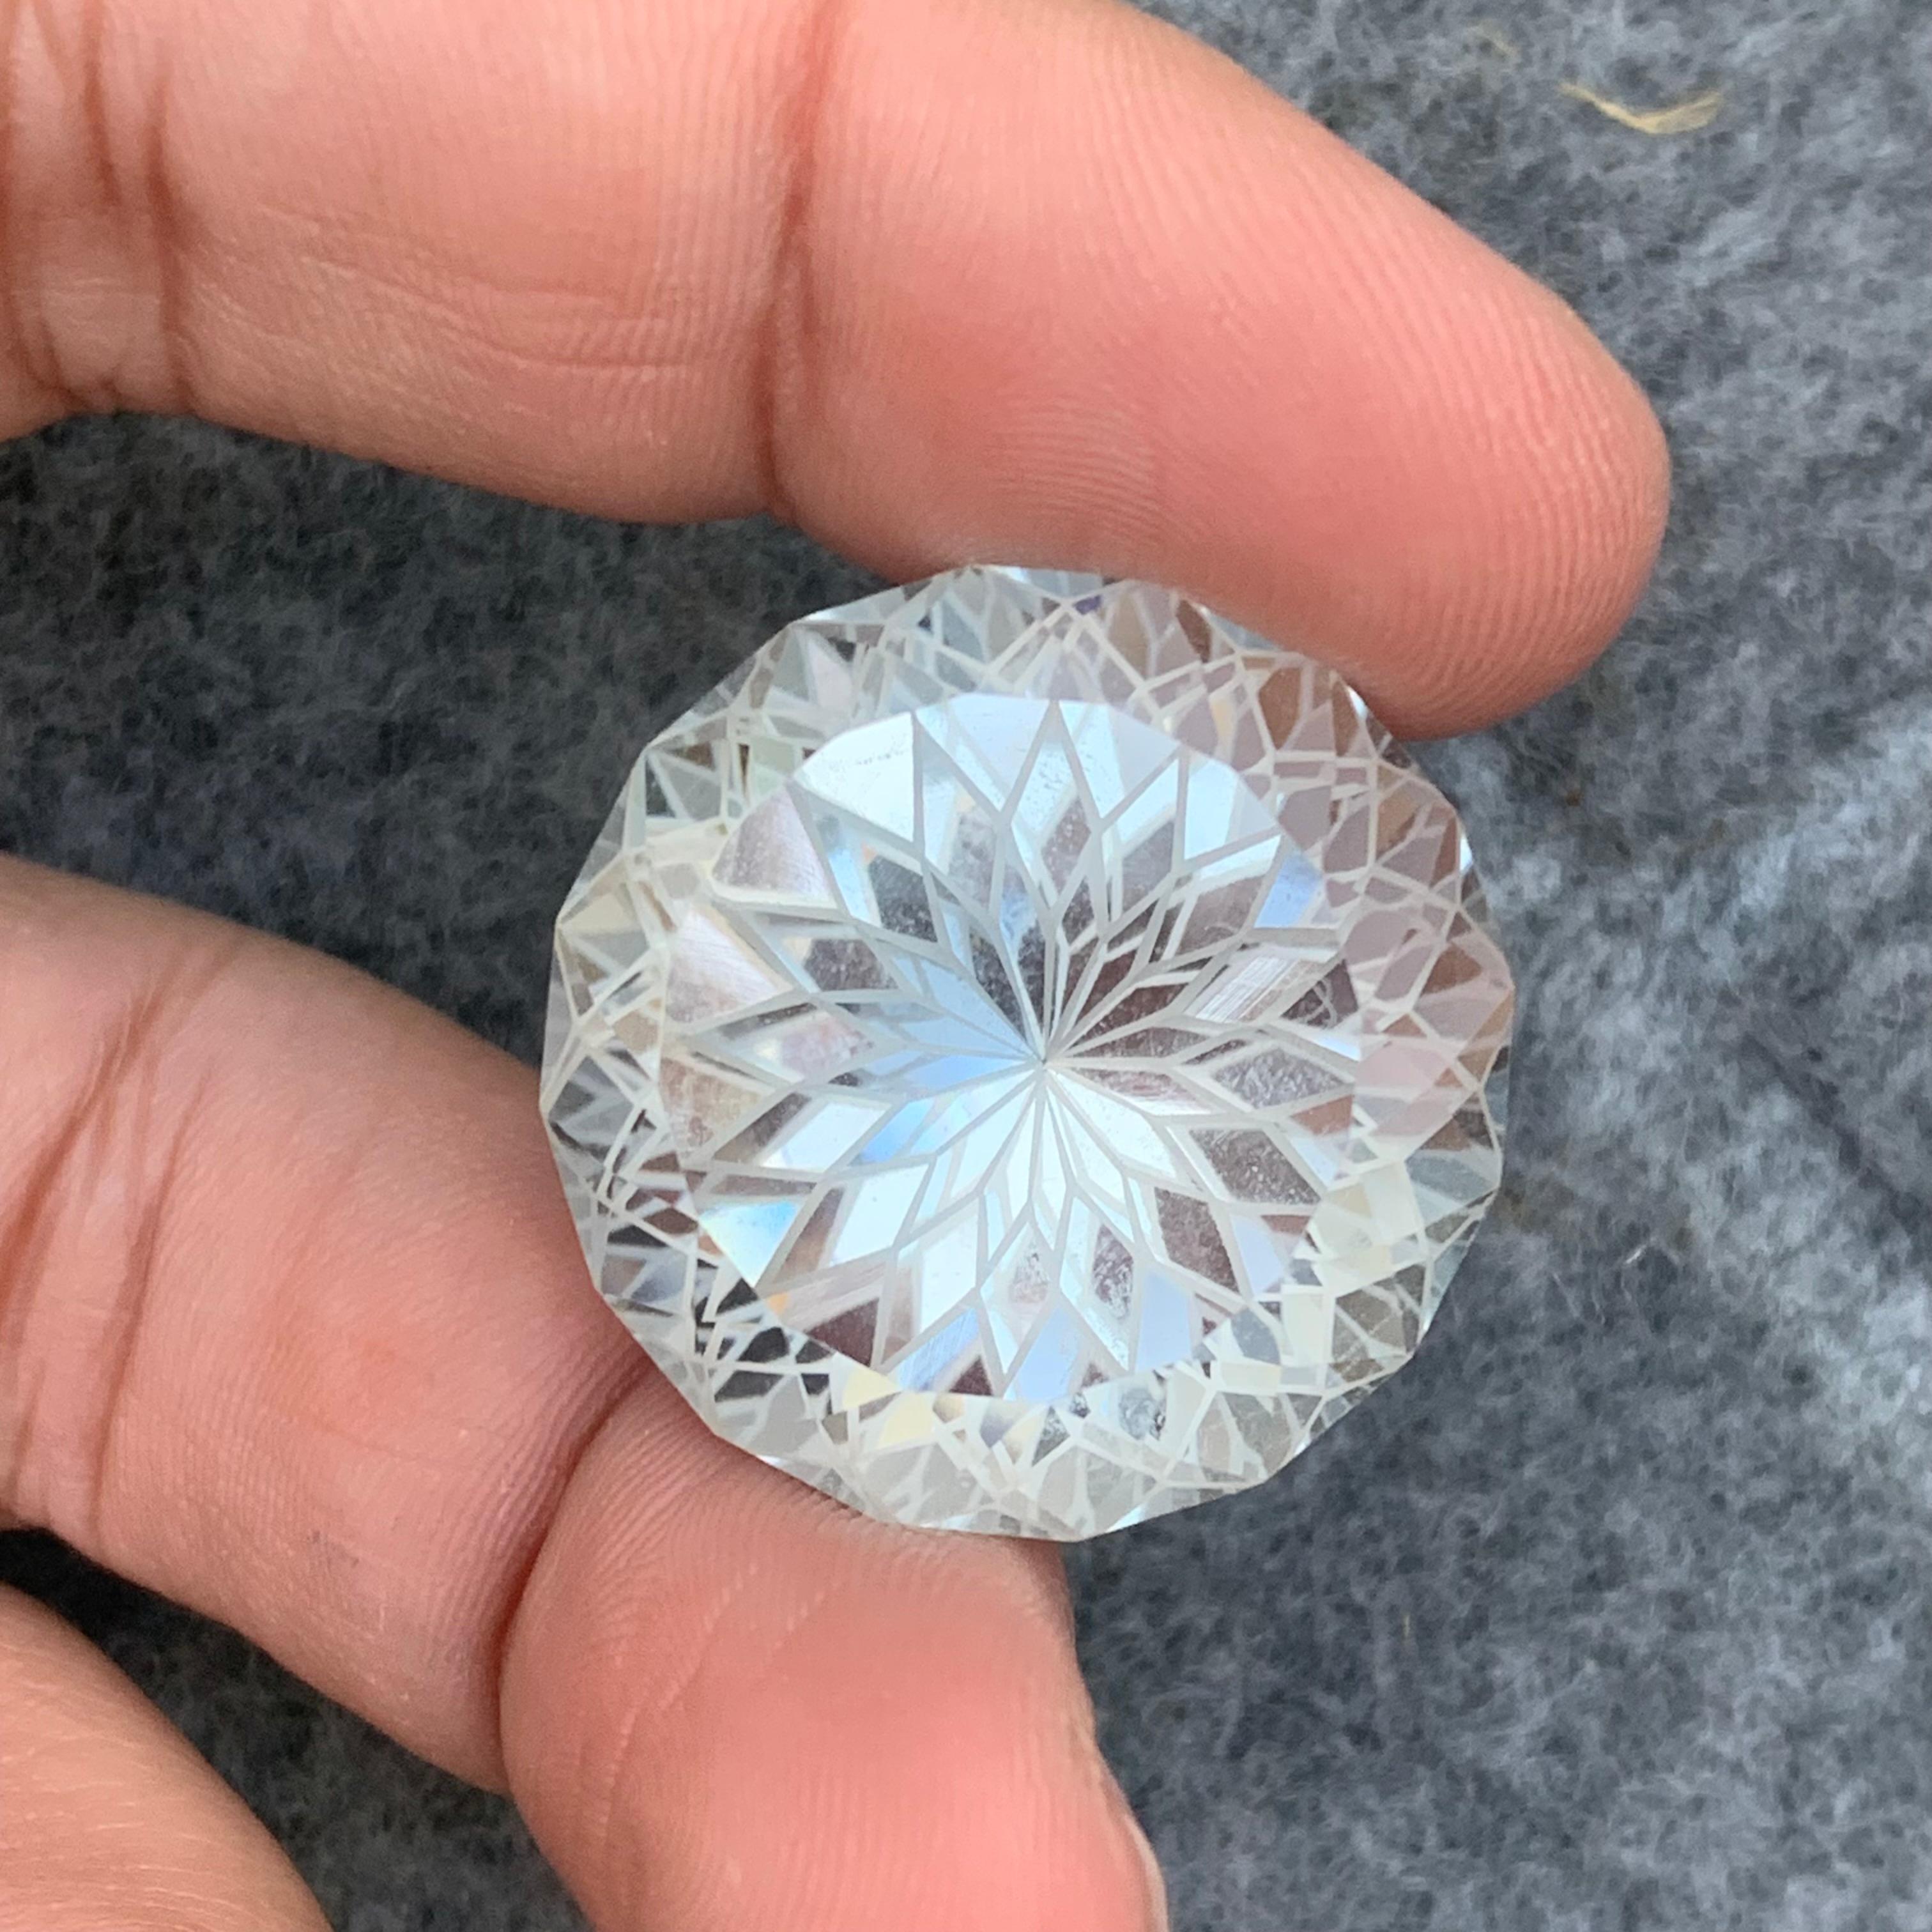 Loose Crystal Quartz
Weight : 68.60 Carats
Dimensions : 26x26x19 Mm
Origin : Brazil
Clarity : AAA Eye Clean
Shape: Round Shape
Facet: Flower Cut 
Certificate: On Demand
Treatment: Non
Color: Colorless
Quartz crystal is a power stone that's prized as